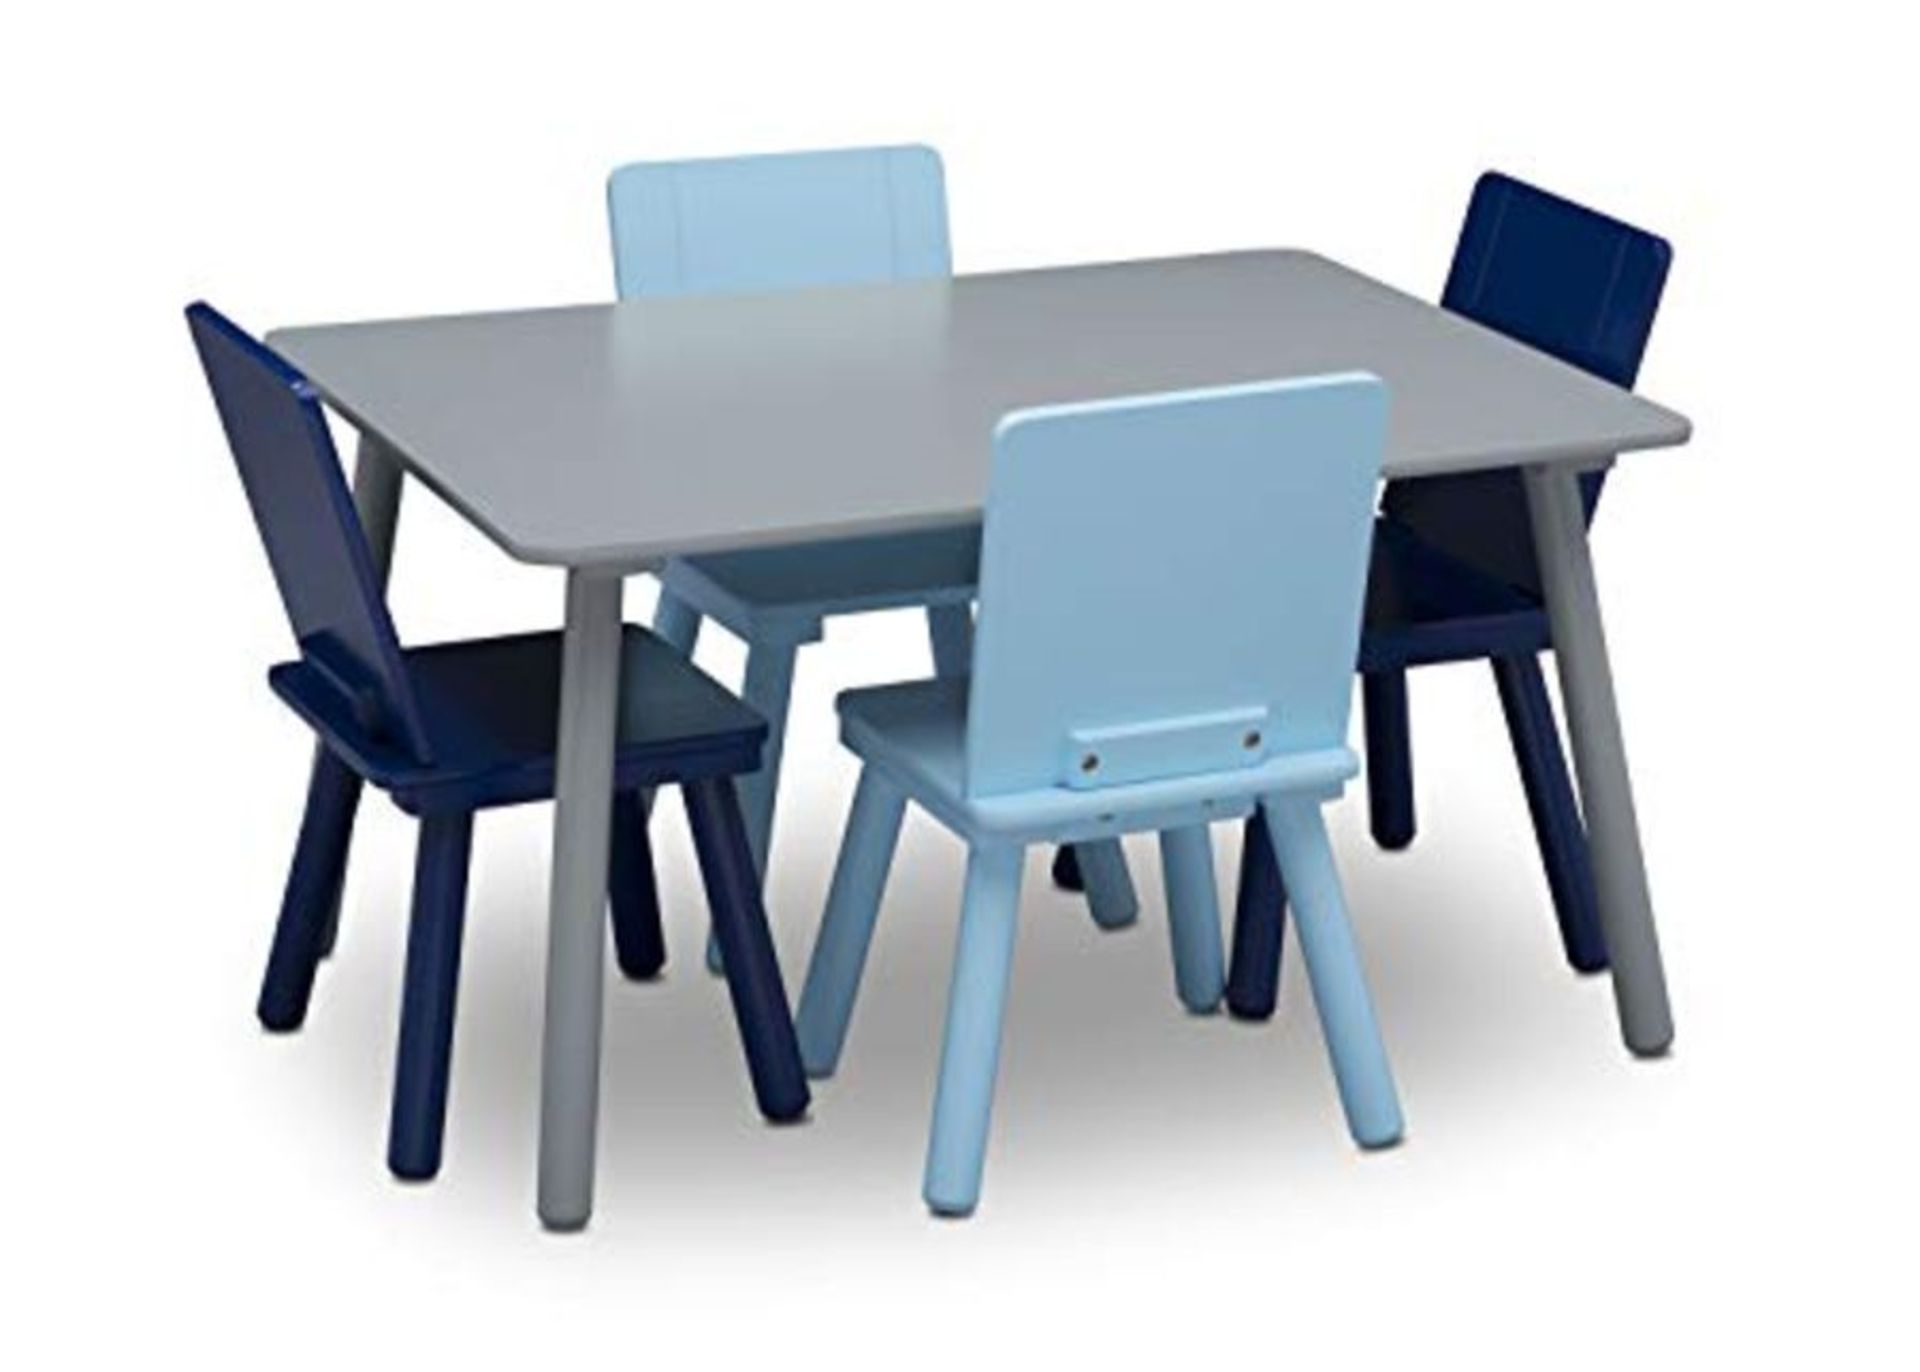 RRP £107.00 Delta Children Kids Table and Chair Set (4 Chairs Included) - Ideal for Arts & Crafts,